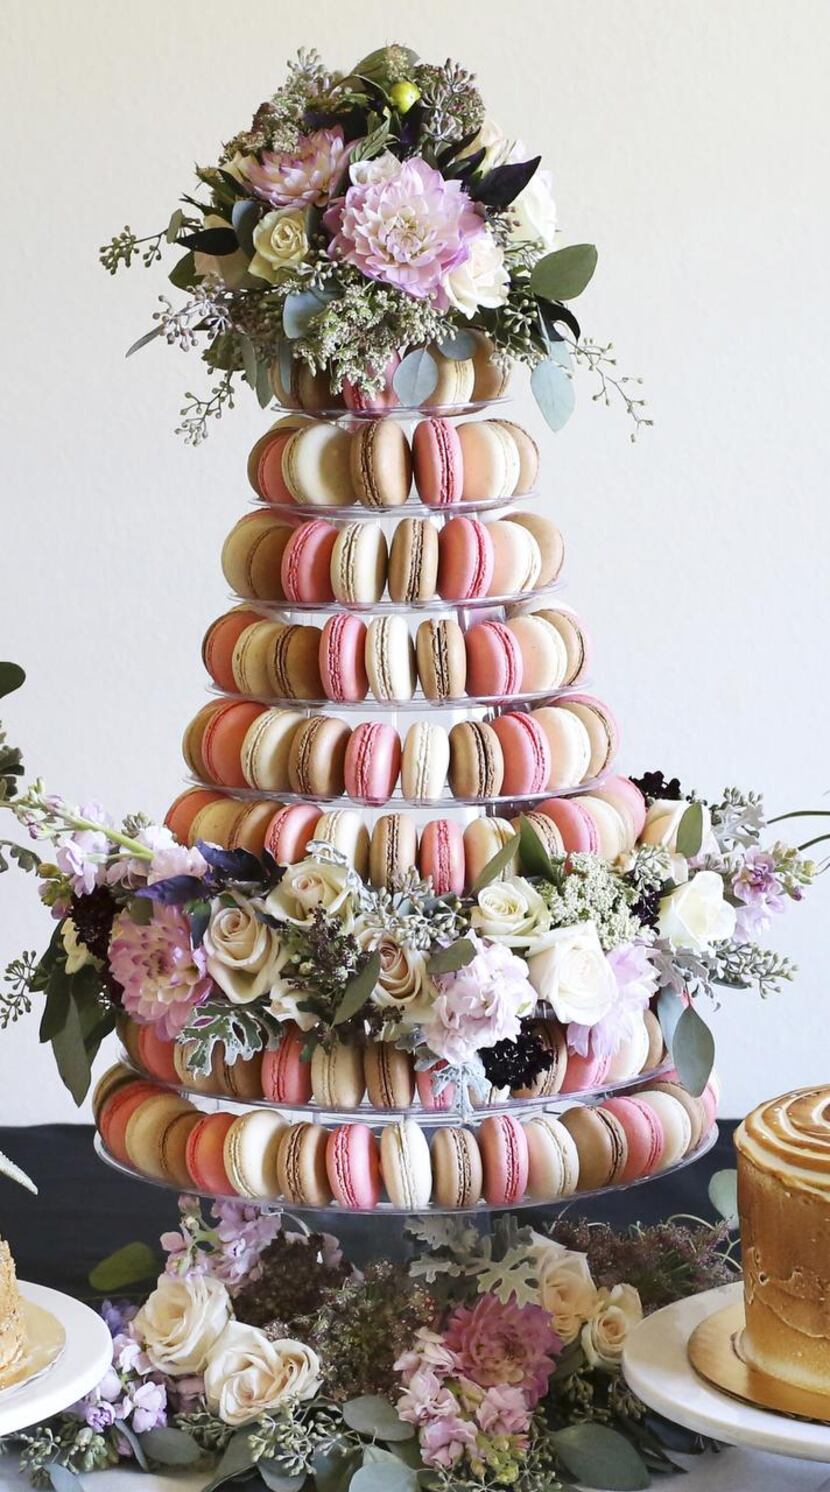 Bisous Bisous Pâtisserie’s  macaron tower for May has rose and cherry blossom flavors that...